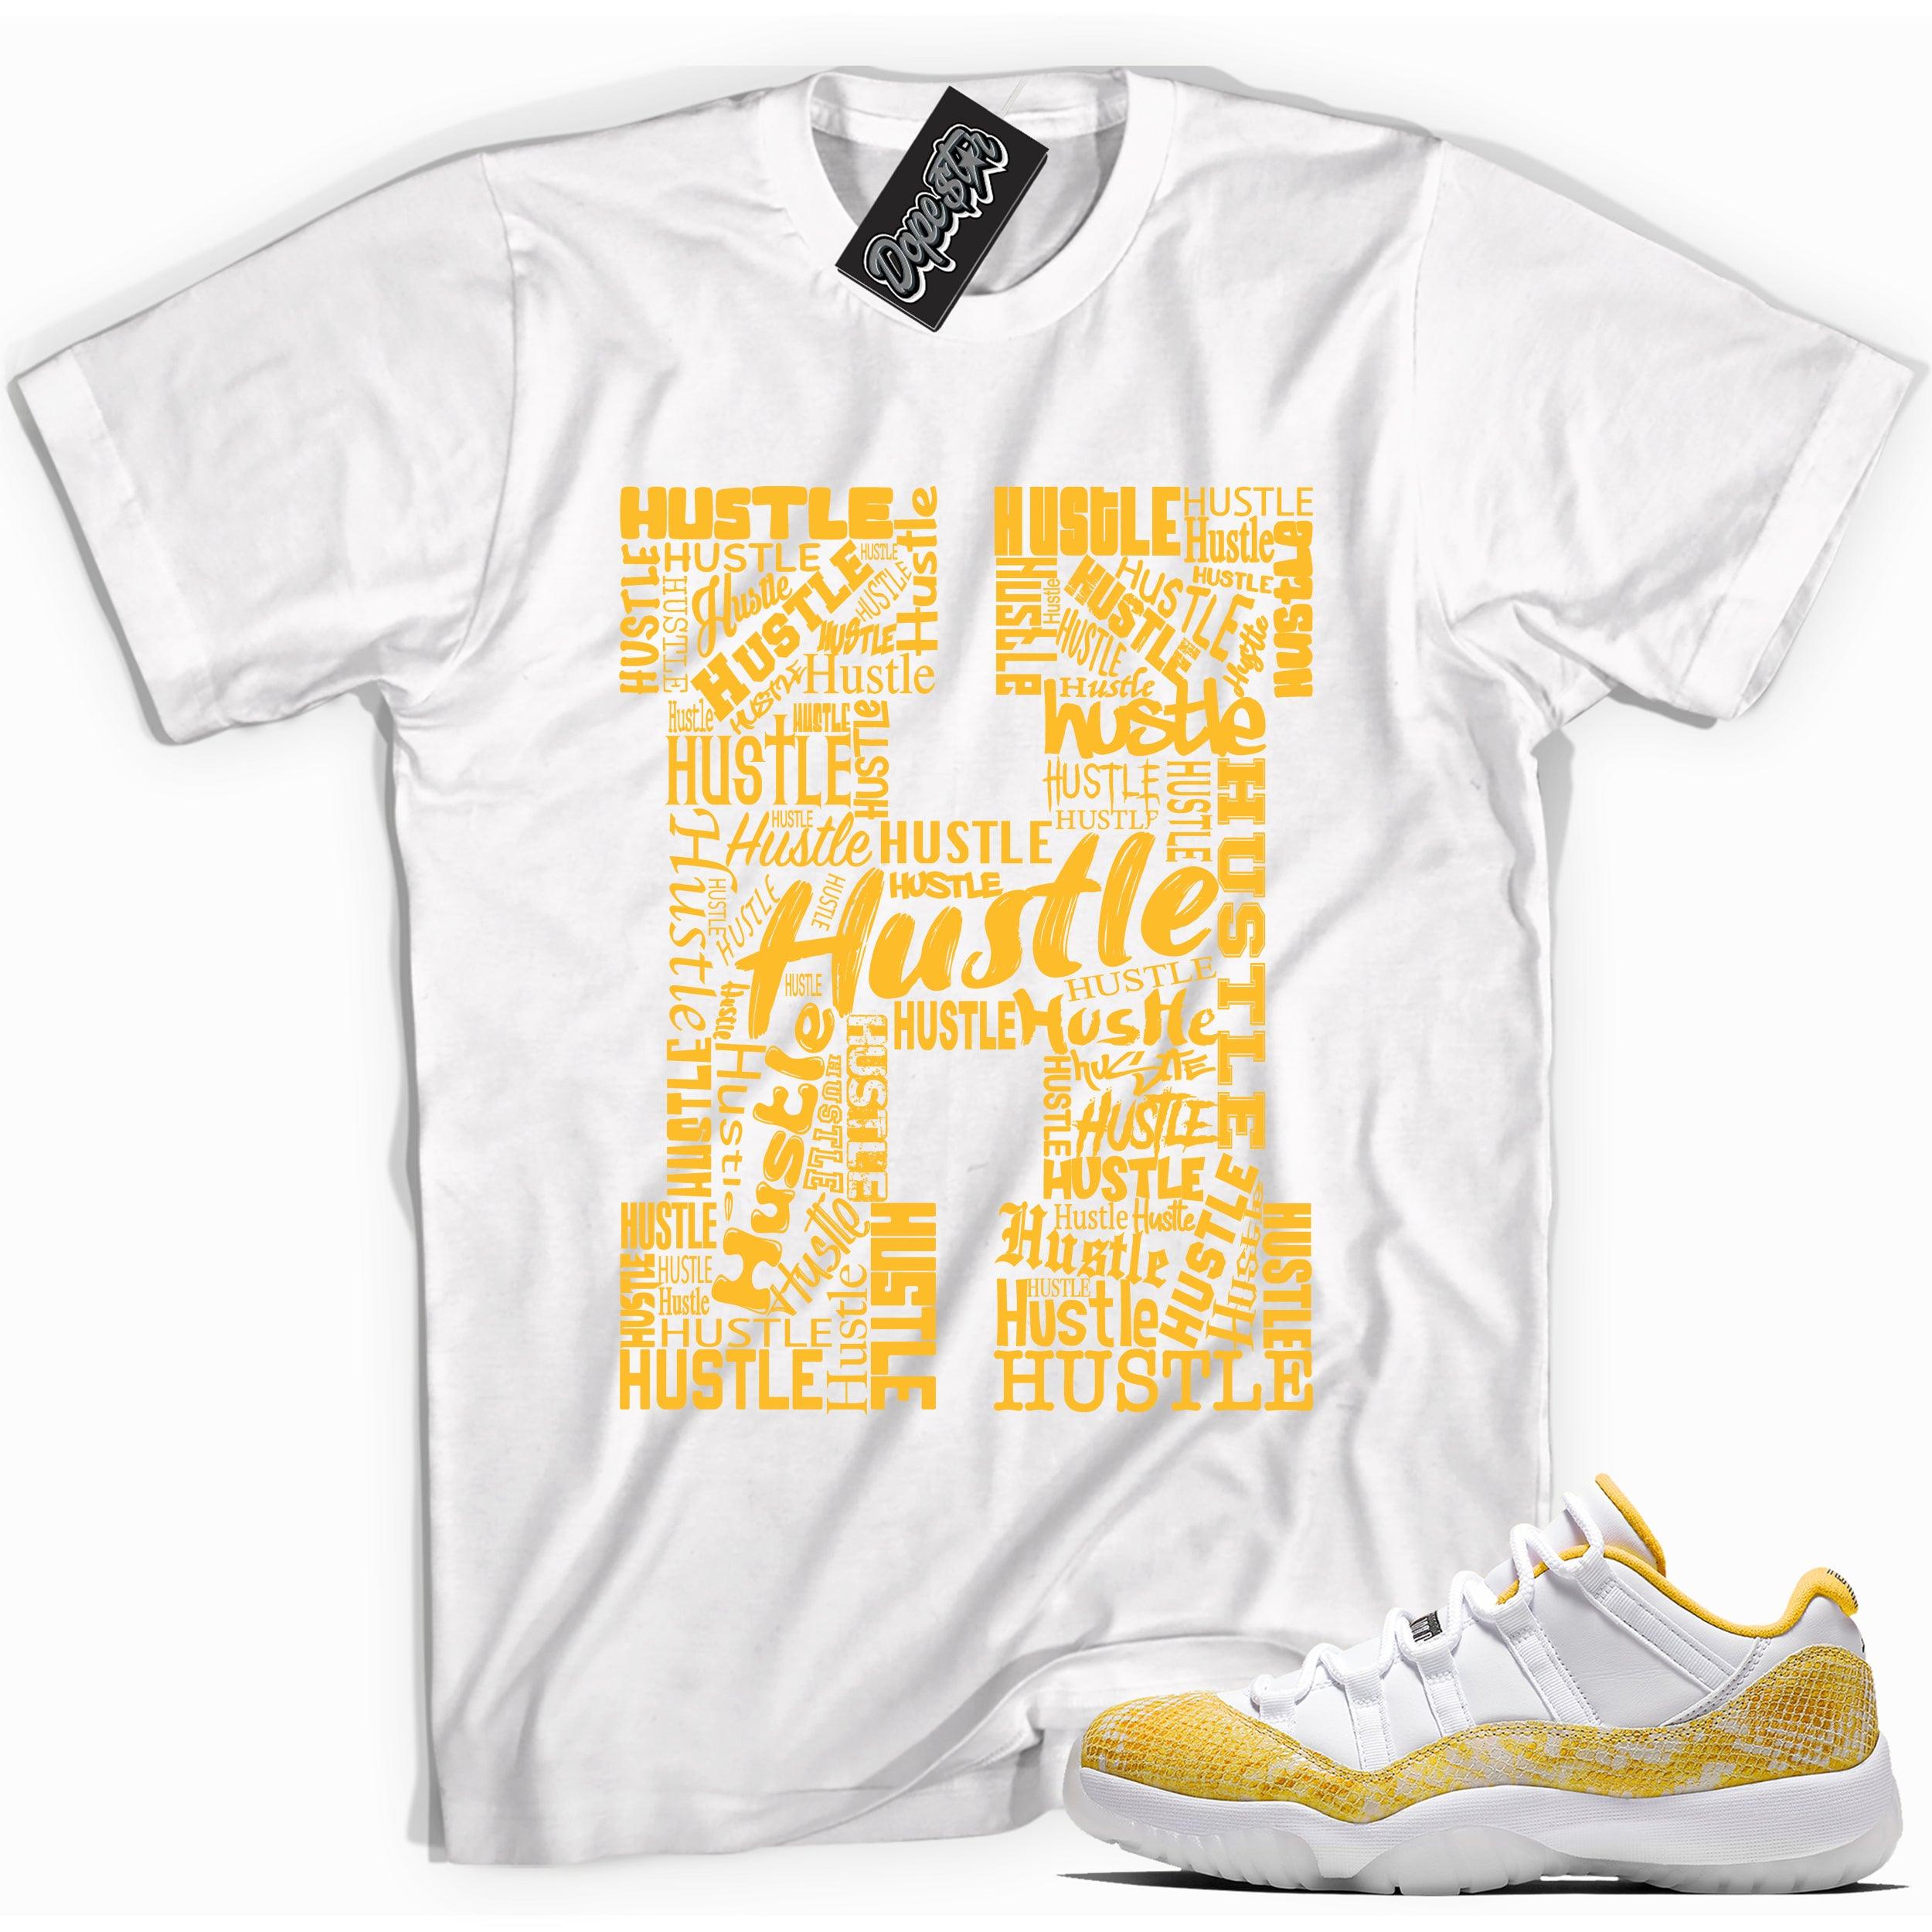 Cool white graphic tee with 'H for hustle' print, that perfectly matches Air Jordan 11 Retro Low Yellow Snakeskin sneakers